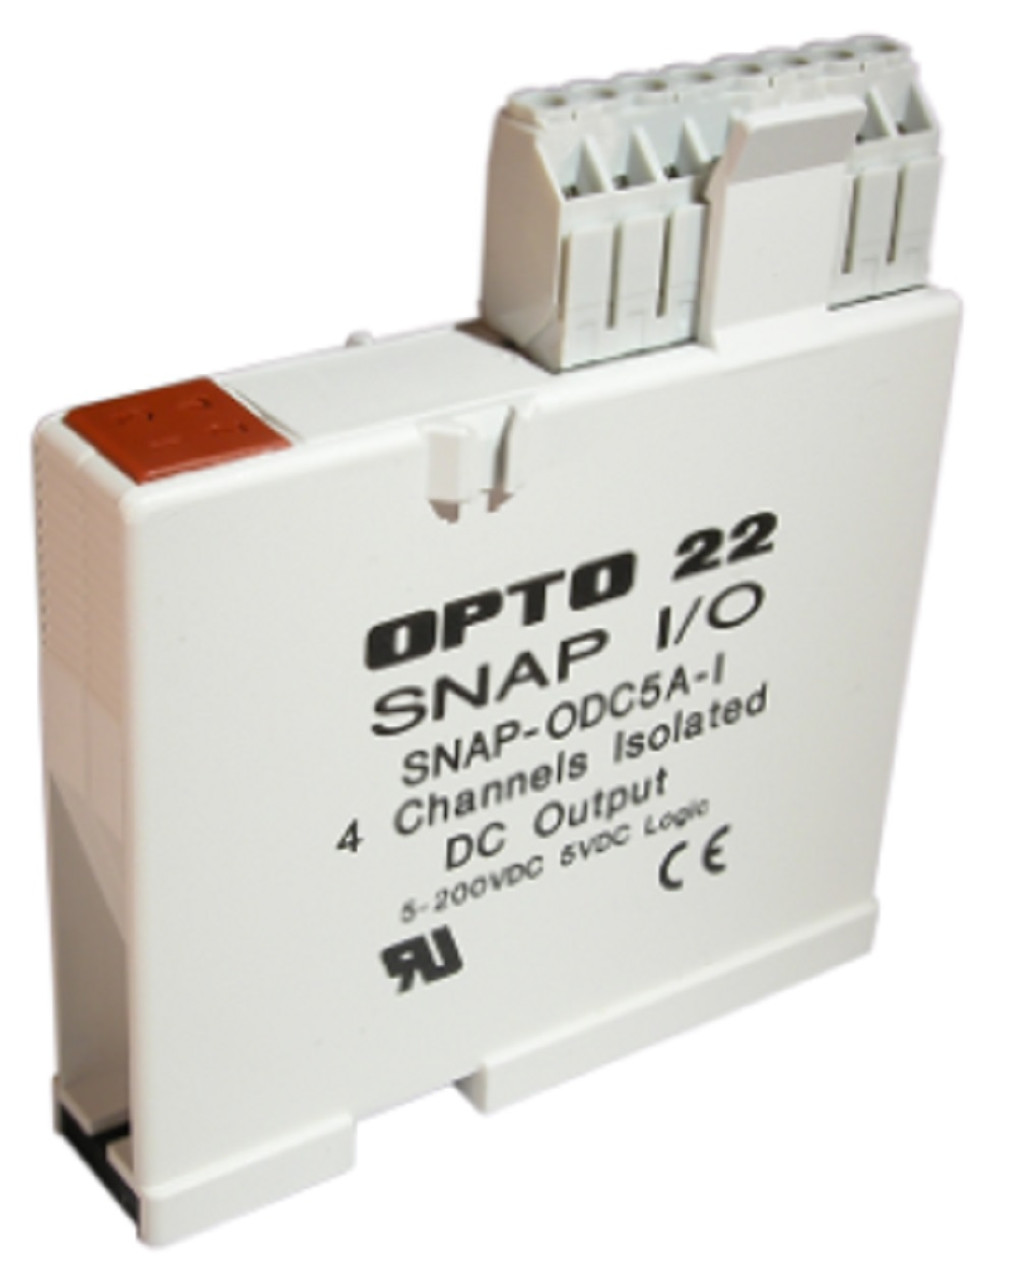 Opto 22 SNAP-ODC5A-I SNAP 4-Ch Isolated 5-200 VDC Digital Discrete Output Module [Refurbished]